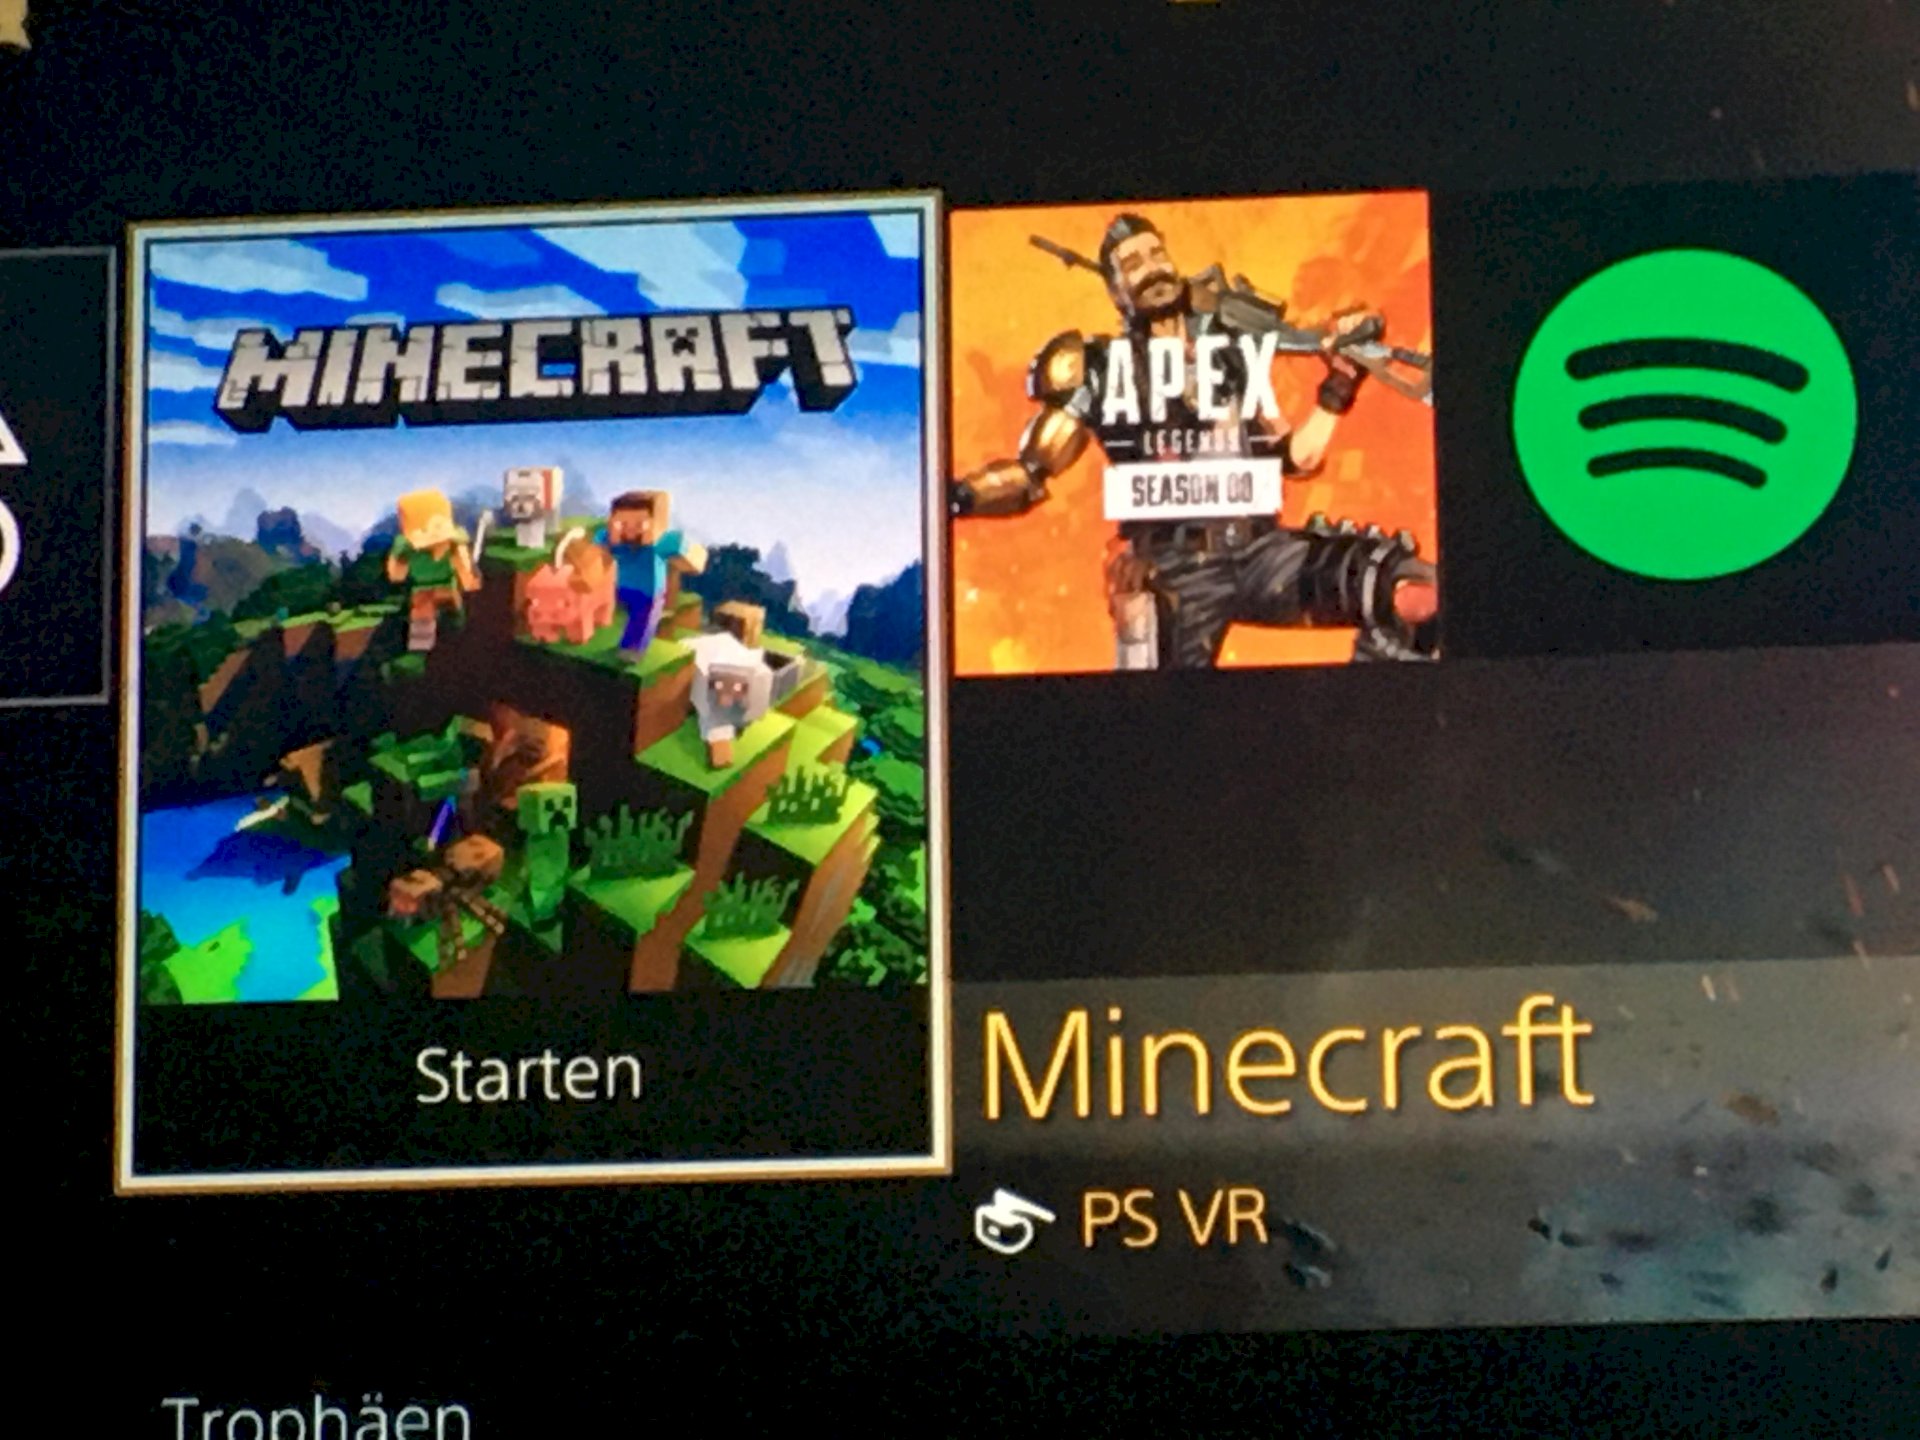 How do I know that I have the Minecraft Bedrock Edition on ps4